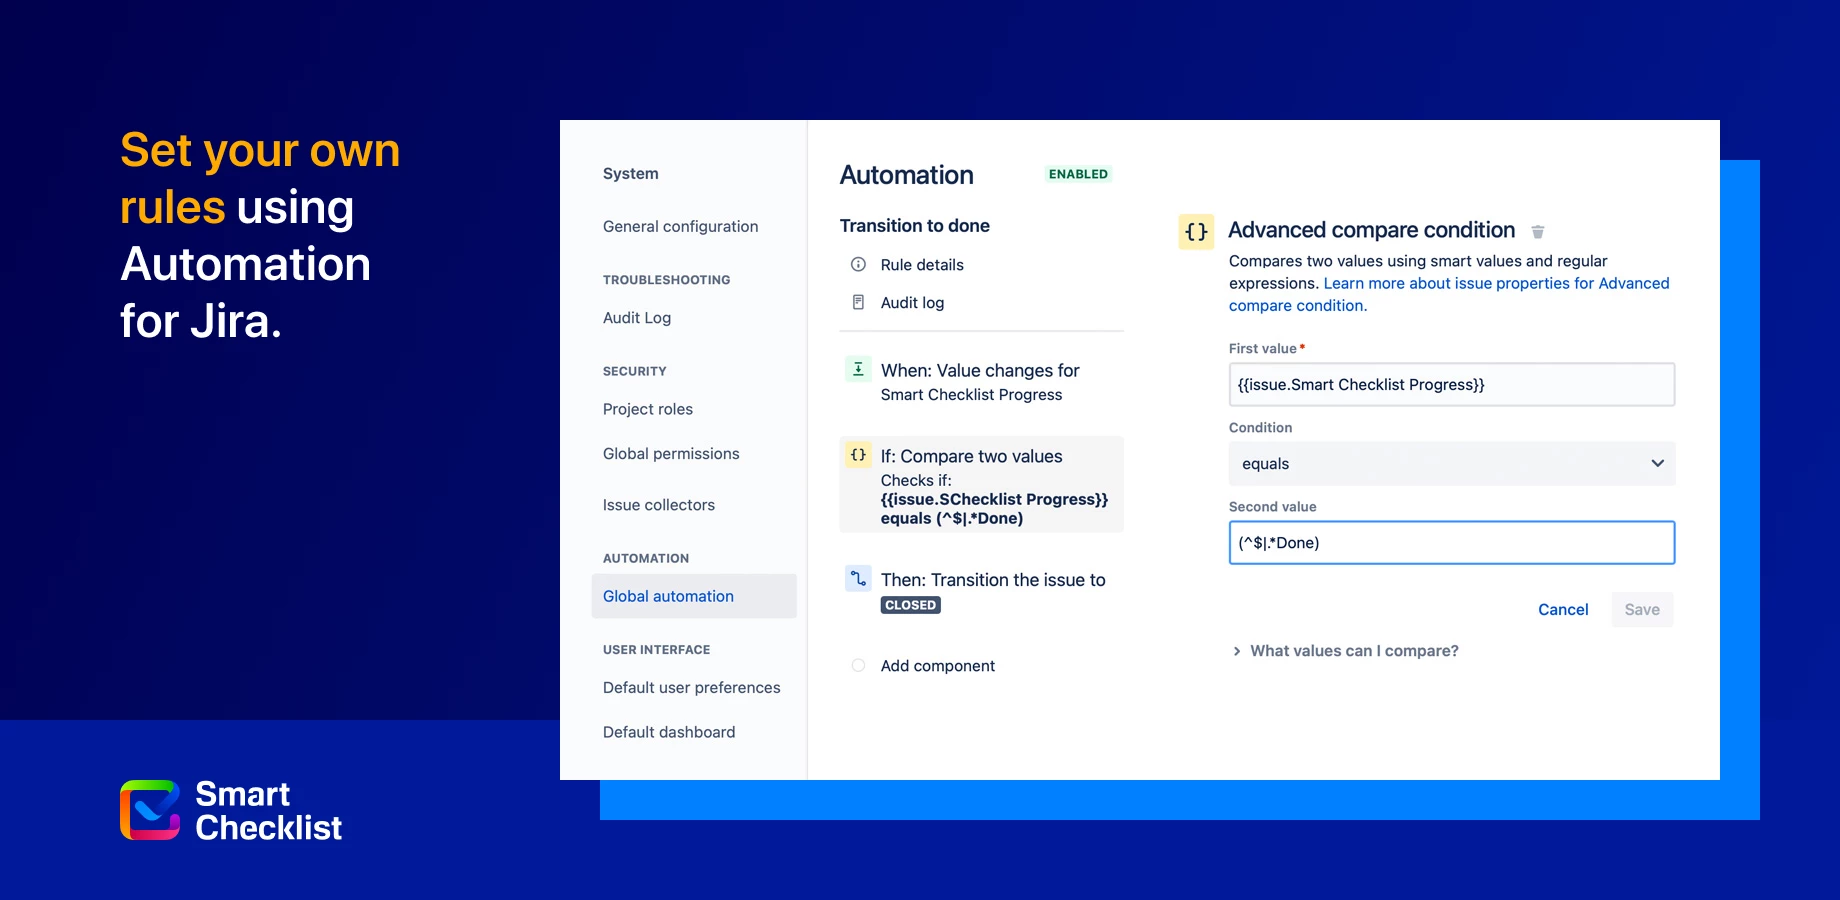 Set your own rules using Automation for Jira